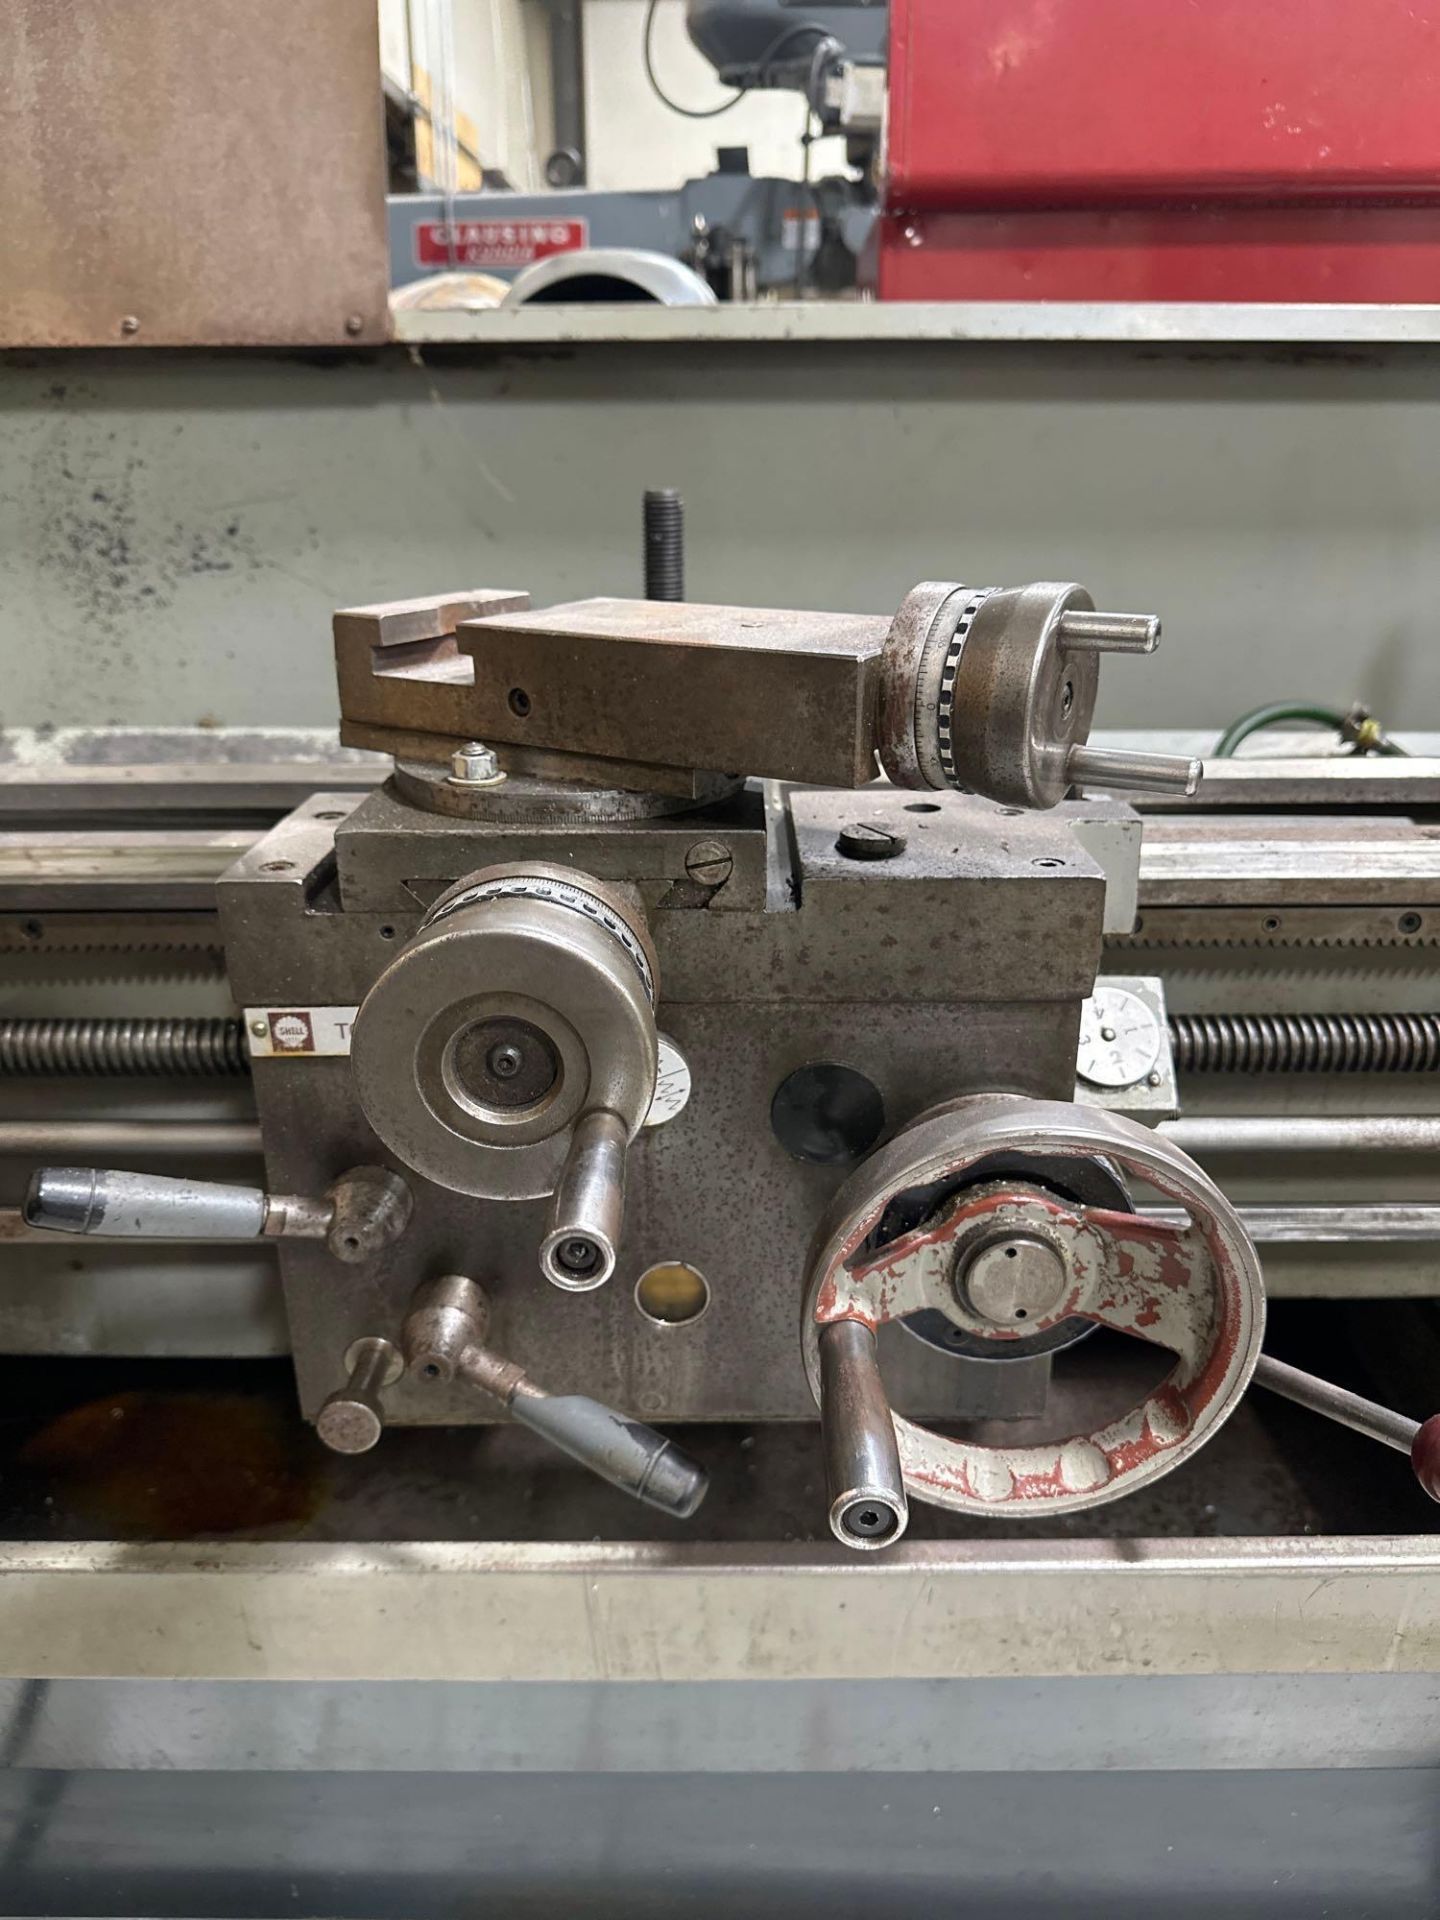 Clausing Cochester Lathe, 8” 3-Jaw Chuck, 2” Spindle Bore, 41” Distance Between Center - Image 7 of 7